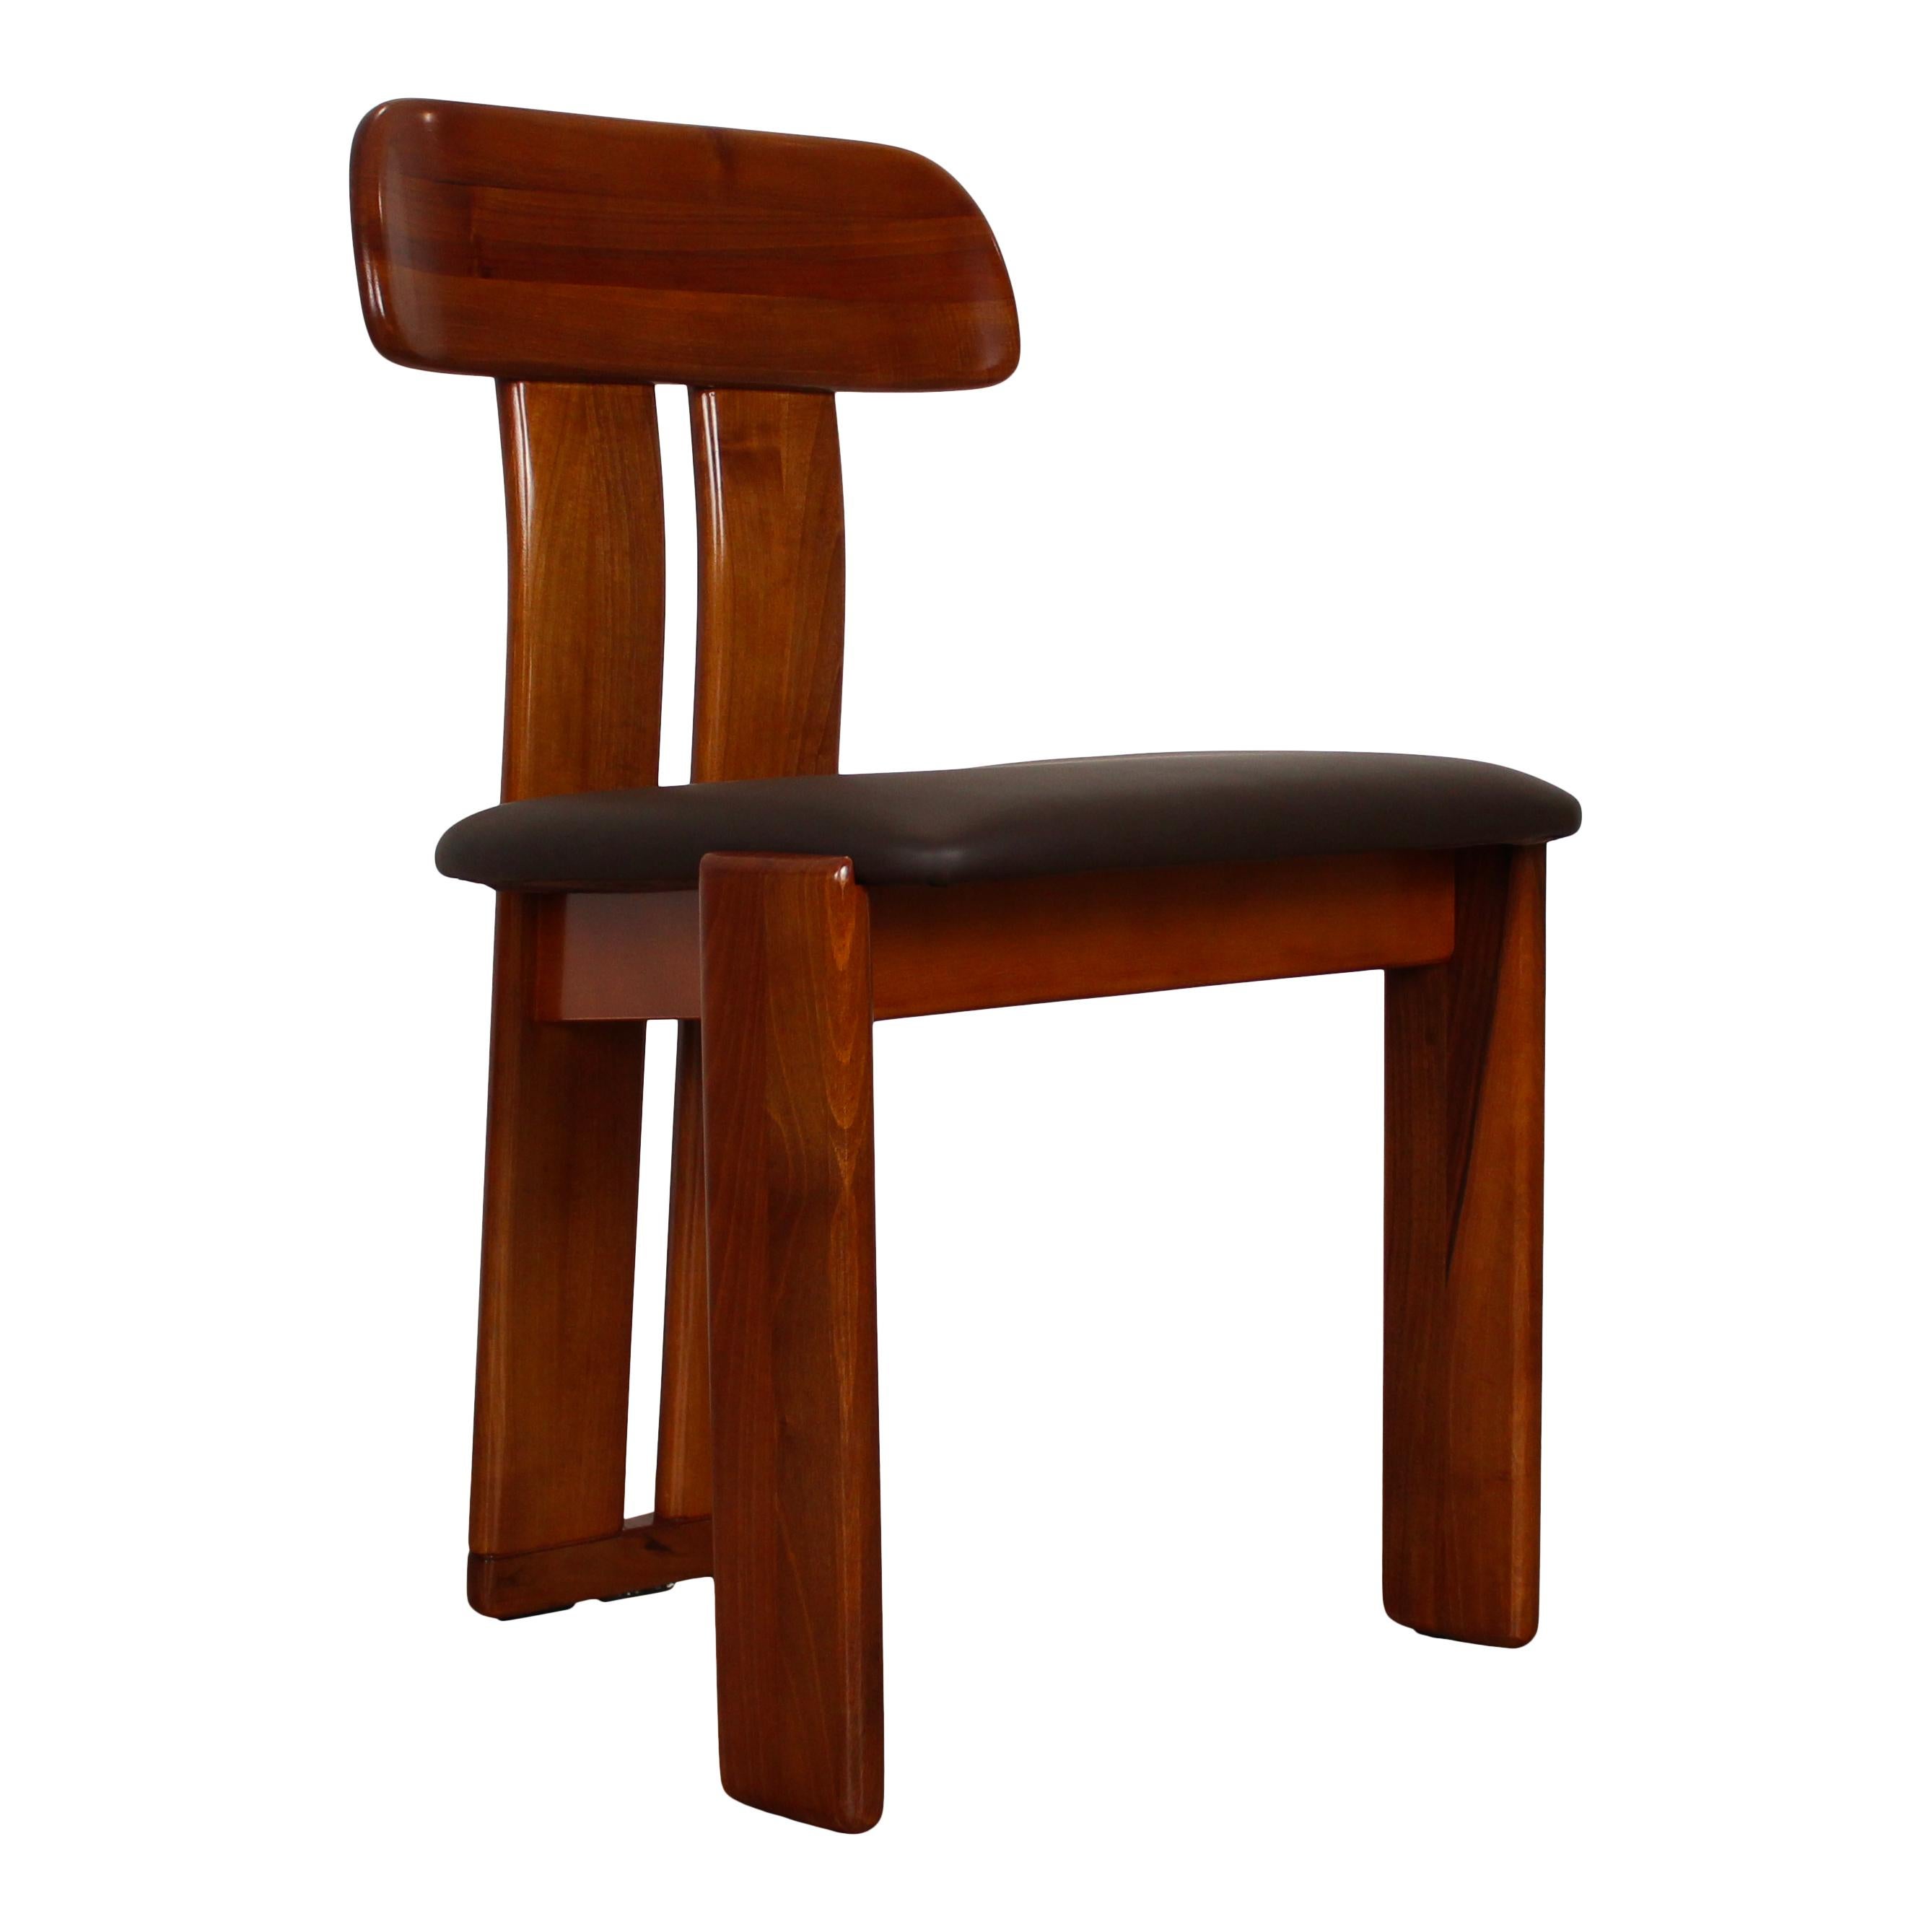 Mario Marenco Walnut Sapporo Dining Chairs for Mobilgirgi, 1970s, Set of 8 For Sale 4